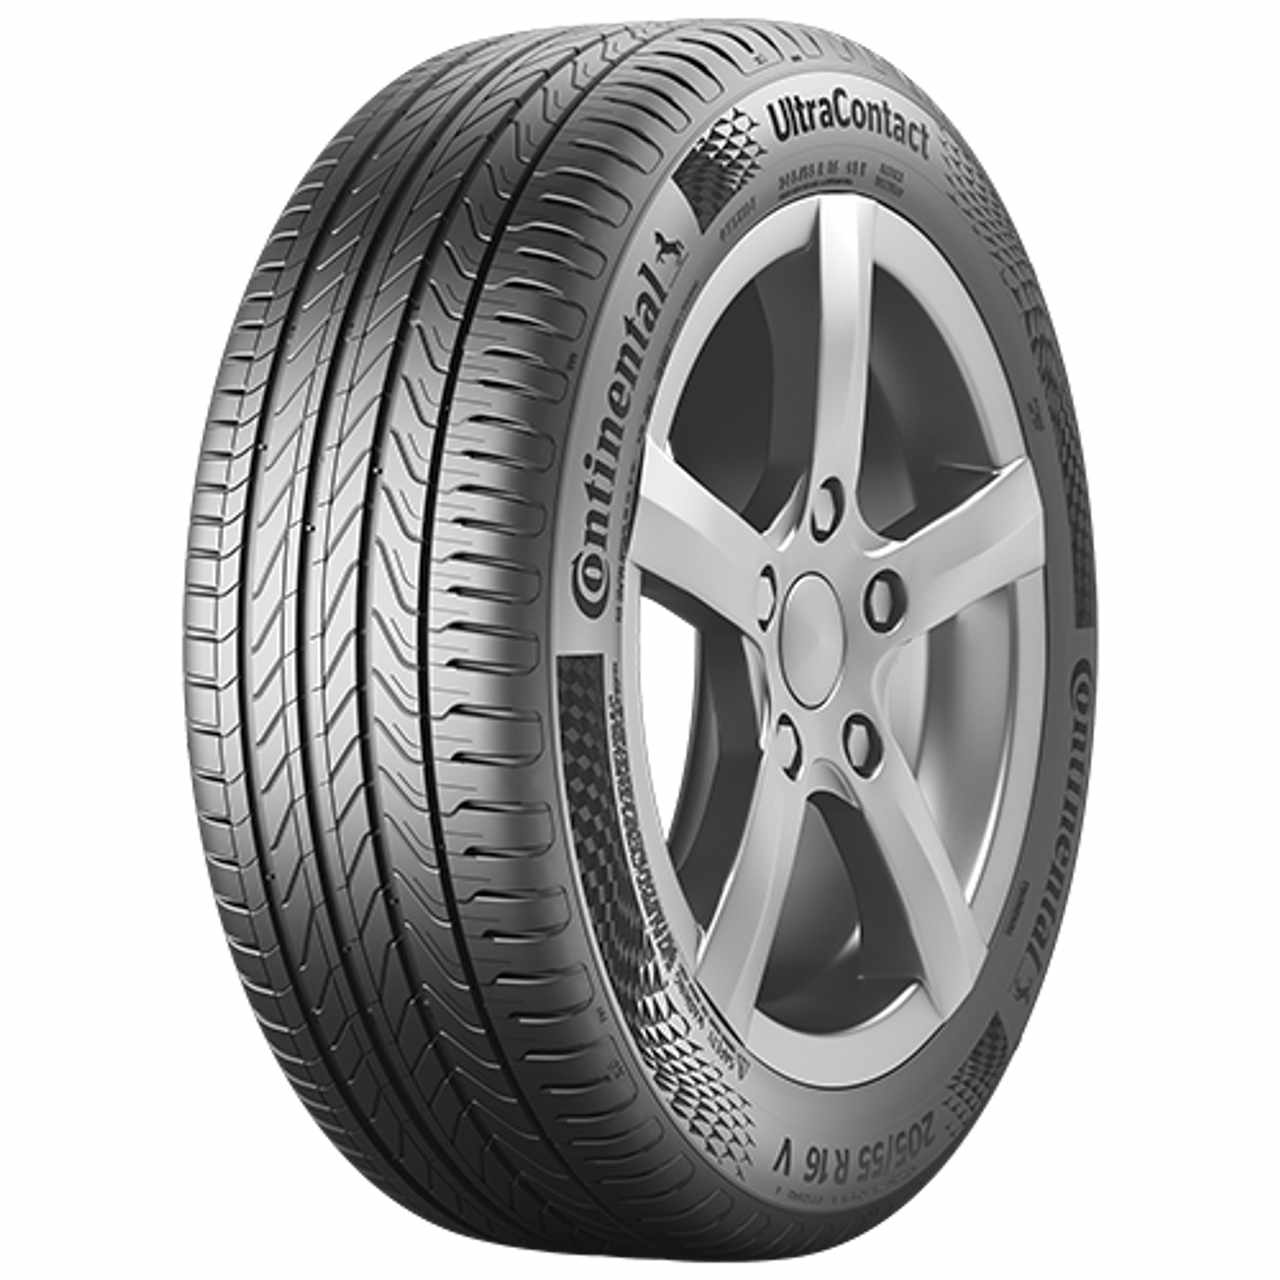 CONTINENTAL ULTRACONTACT (EVc) 235/45R19 99V FR BSW